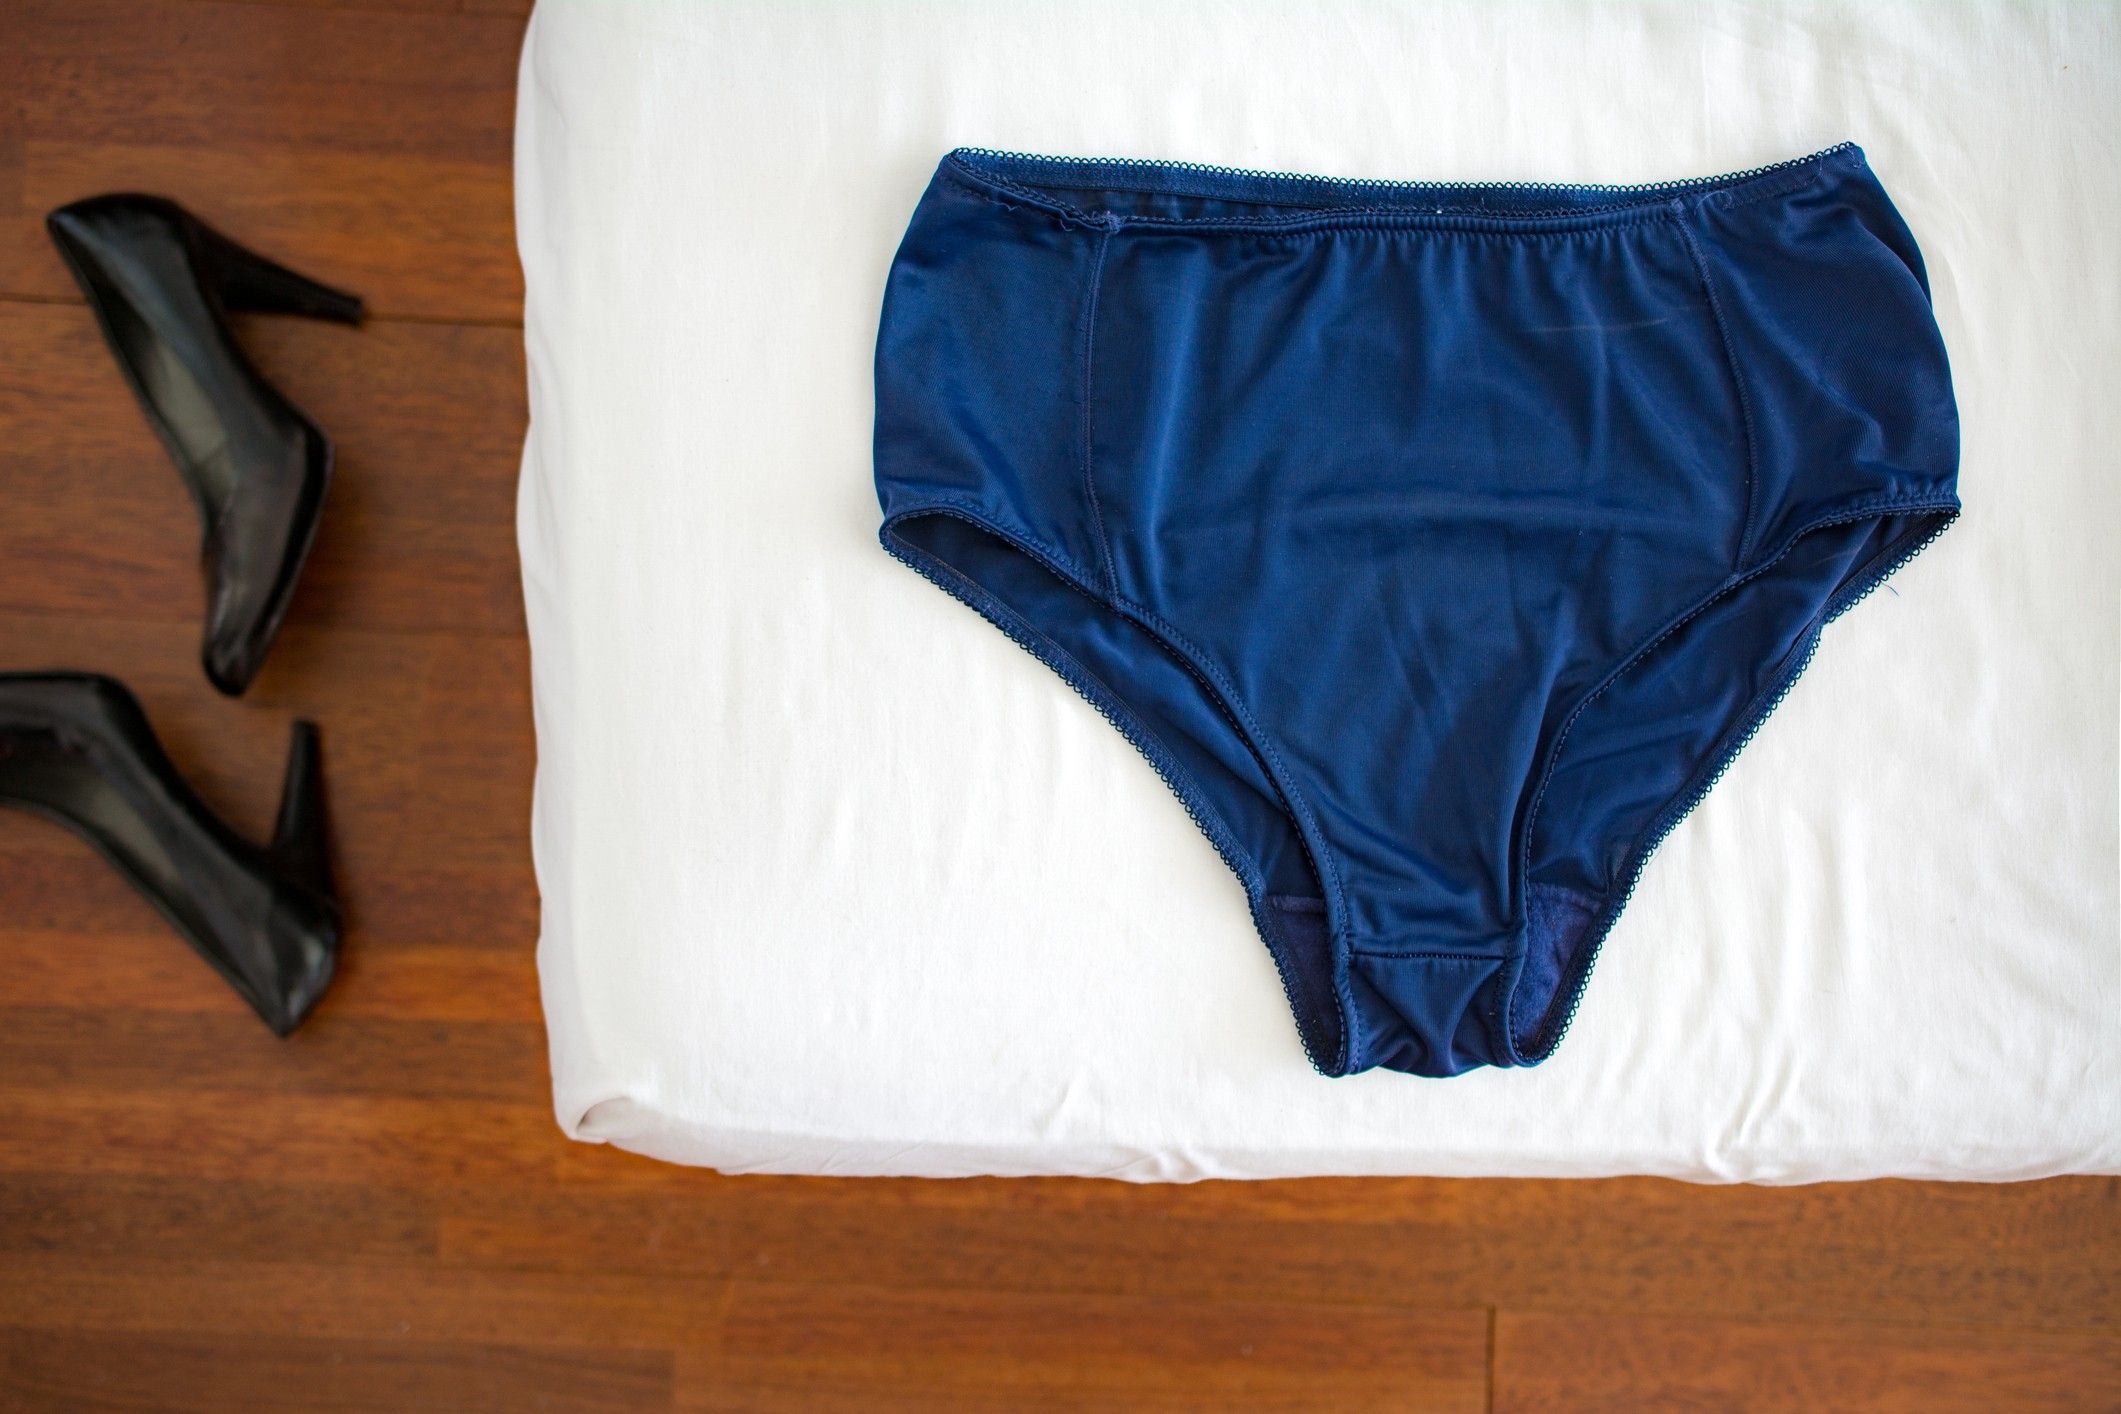 10 Women On Why They Stopped Wearing Panties Underwear image image picture